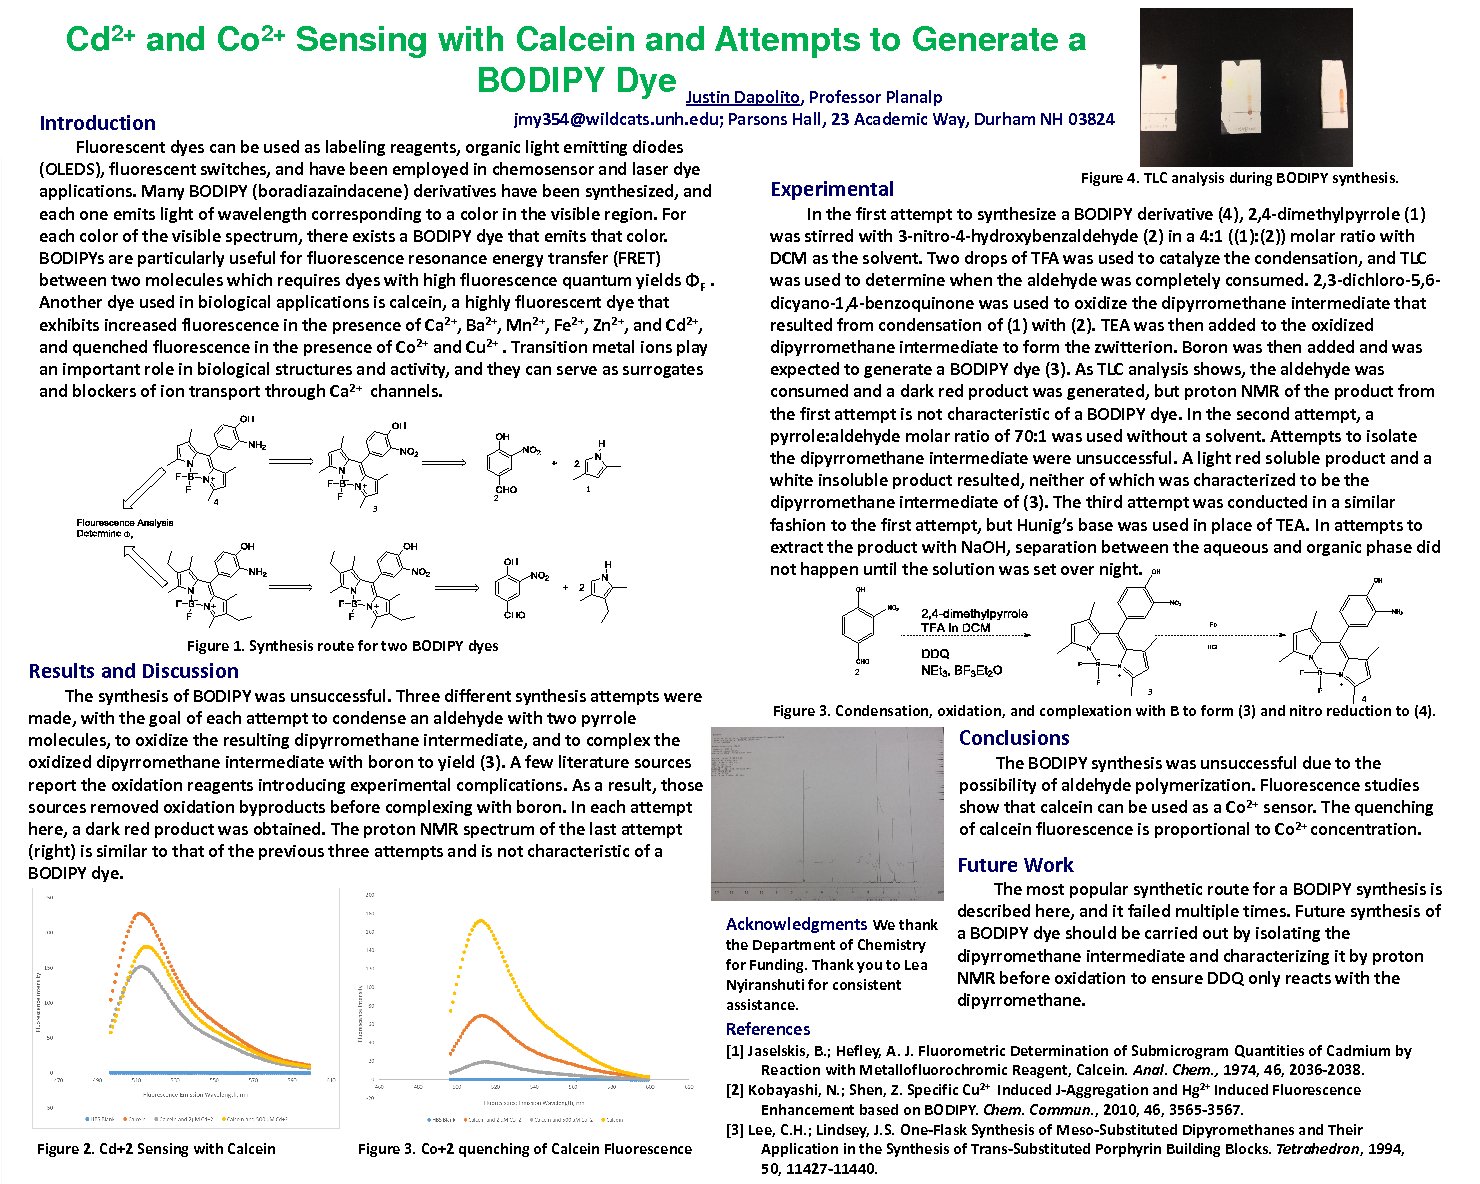 Cd2+ And Co2+ Sensing With Calcein And Attempts To Generate A Bodipy Dye by jmy354